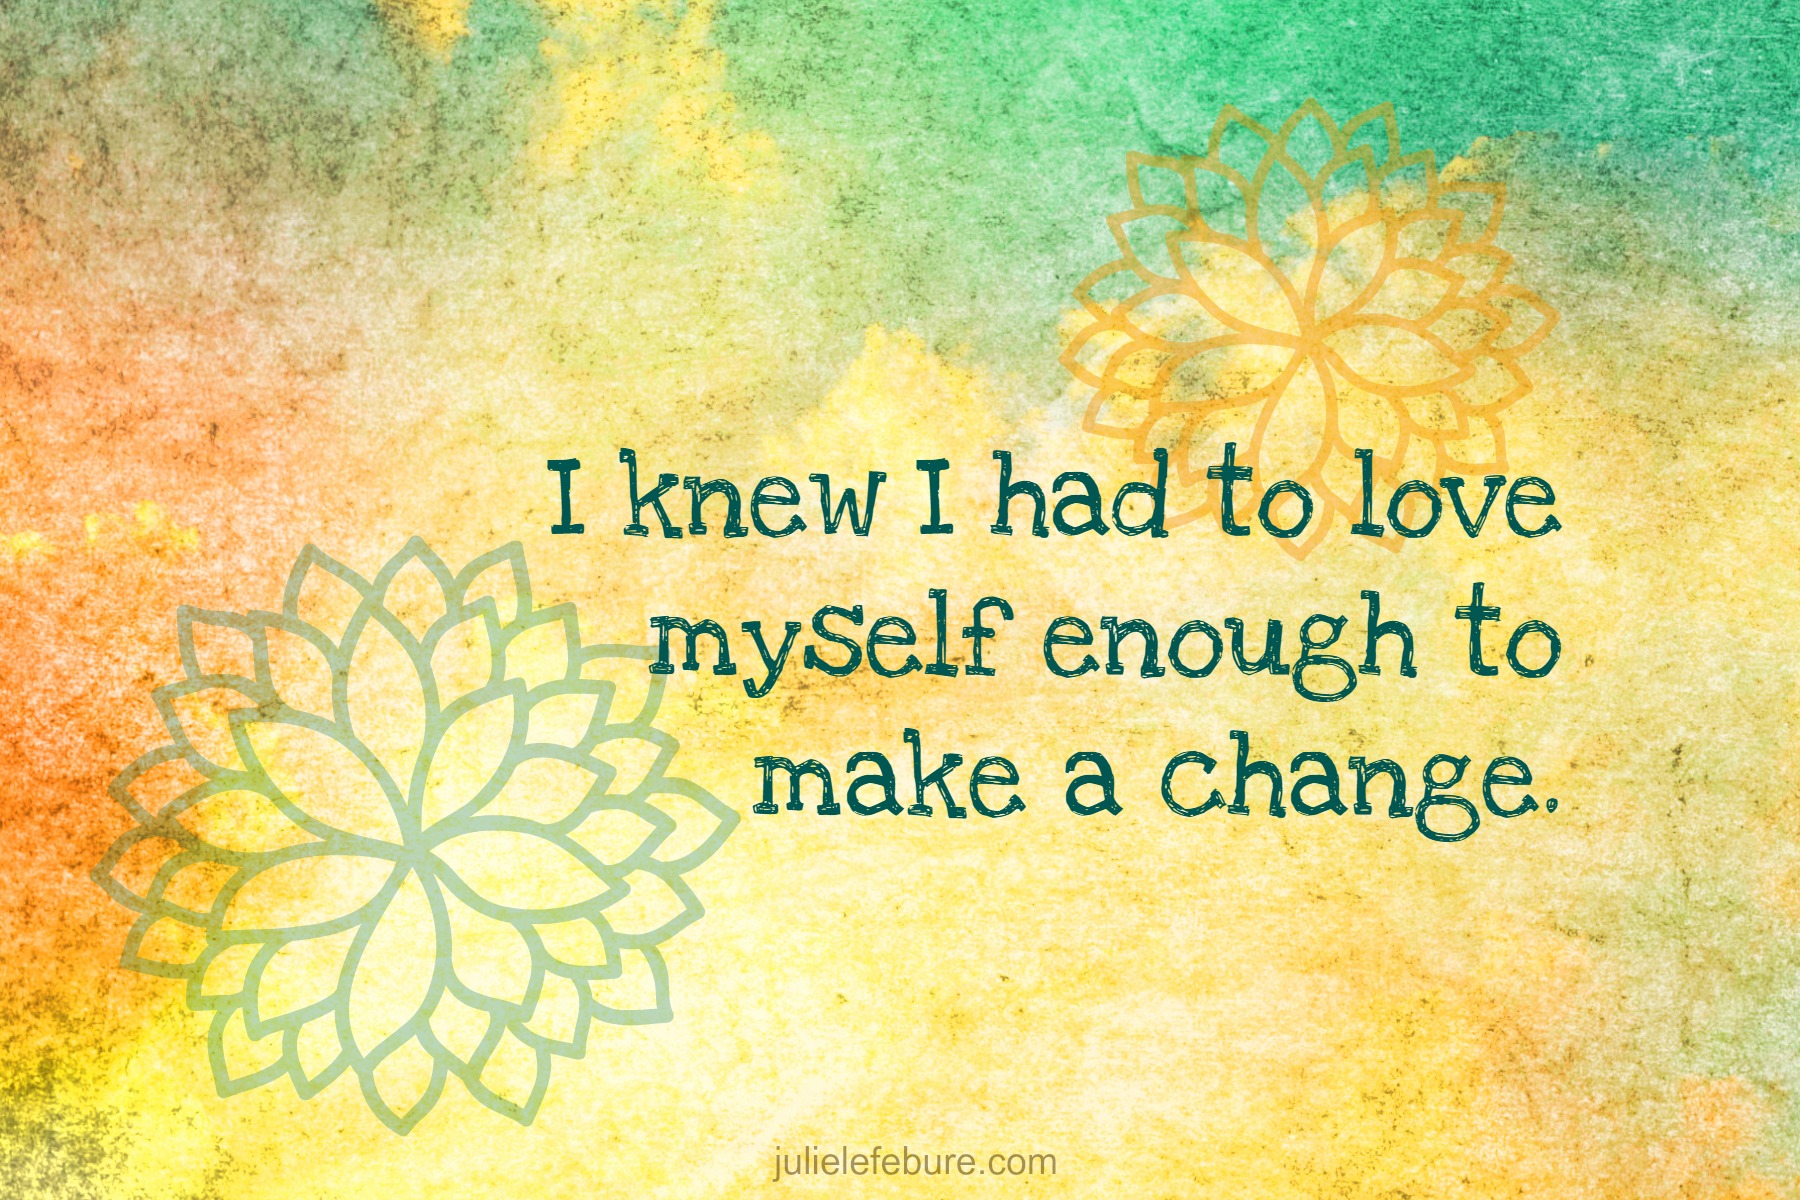 Loving Yourself Enough To Make A Change